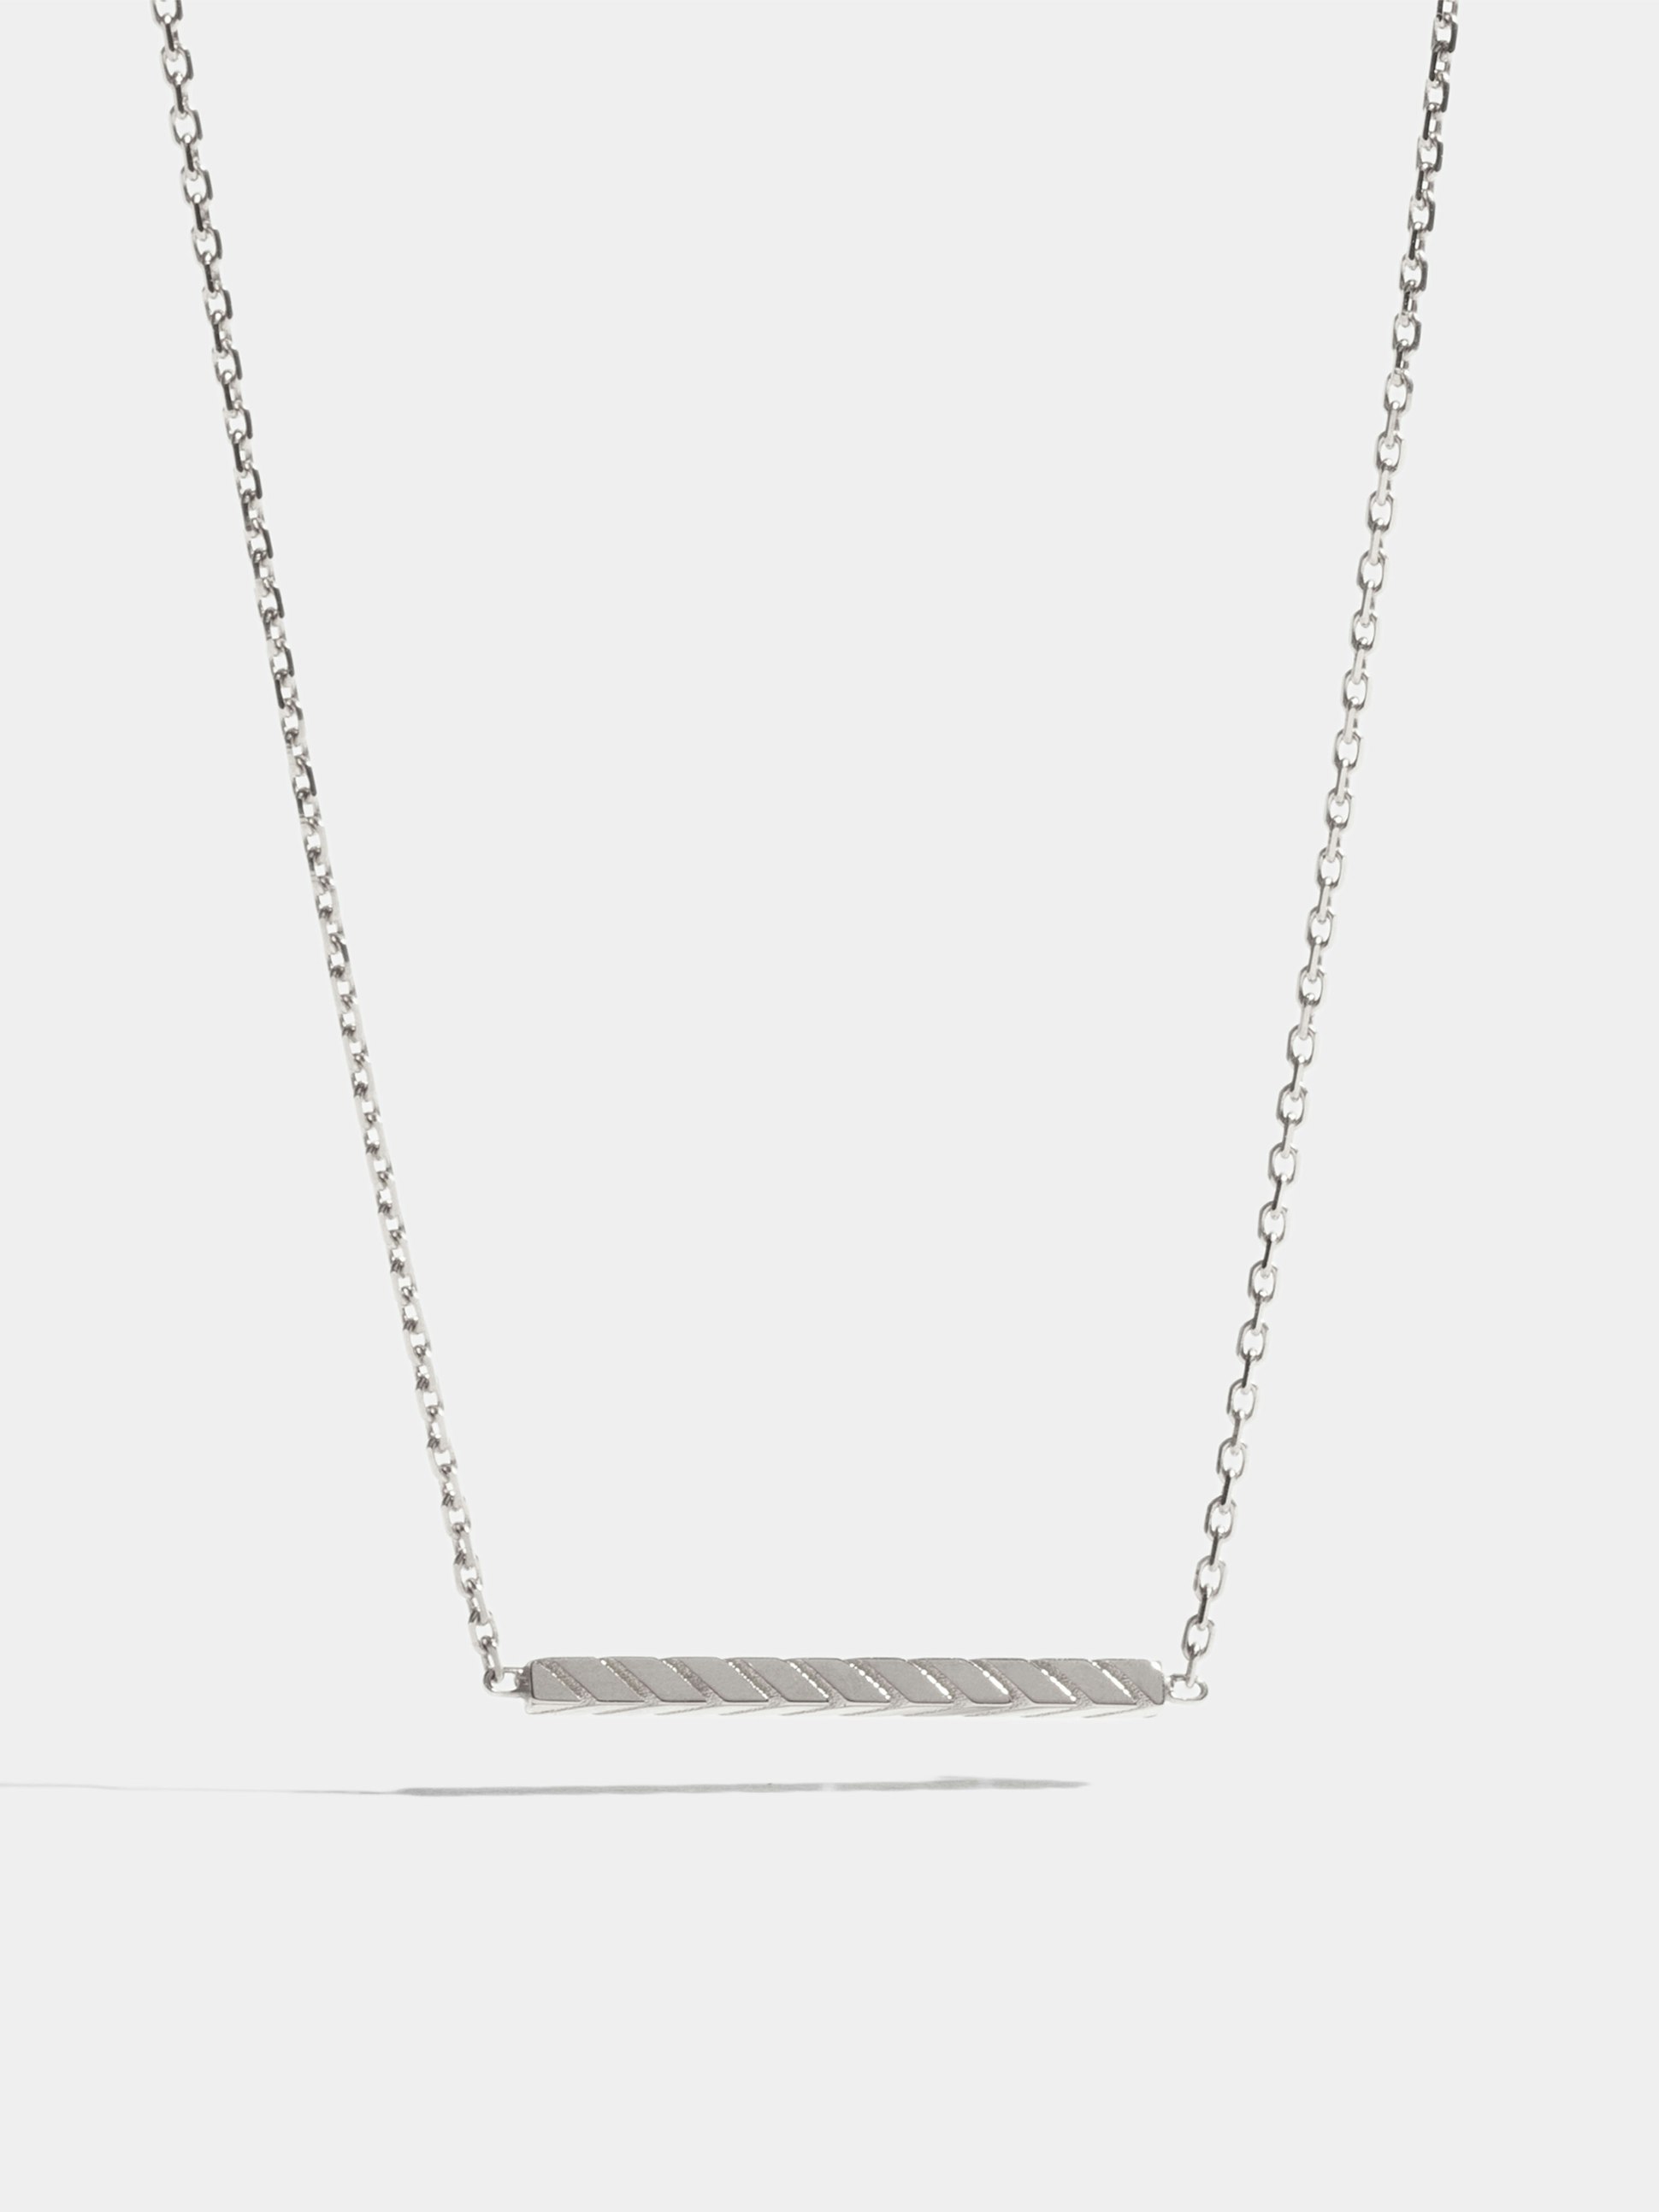 Anagramme grooved motif in white gold 18k Fairmined ethical, on 42 cm chain